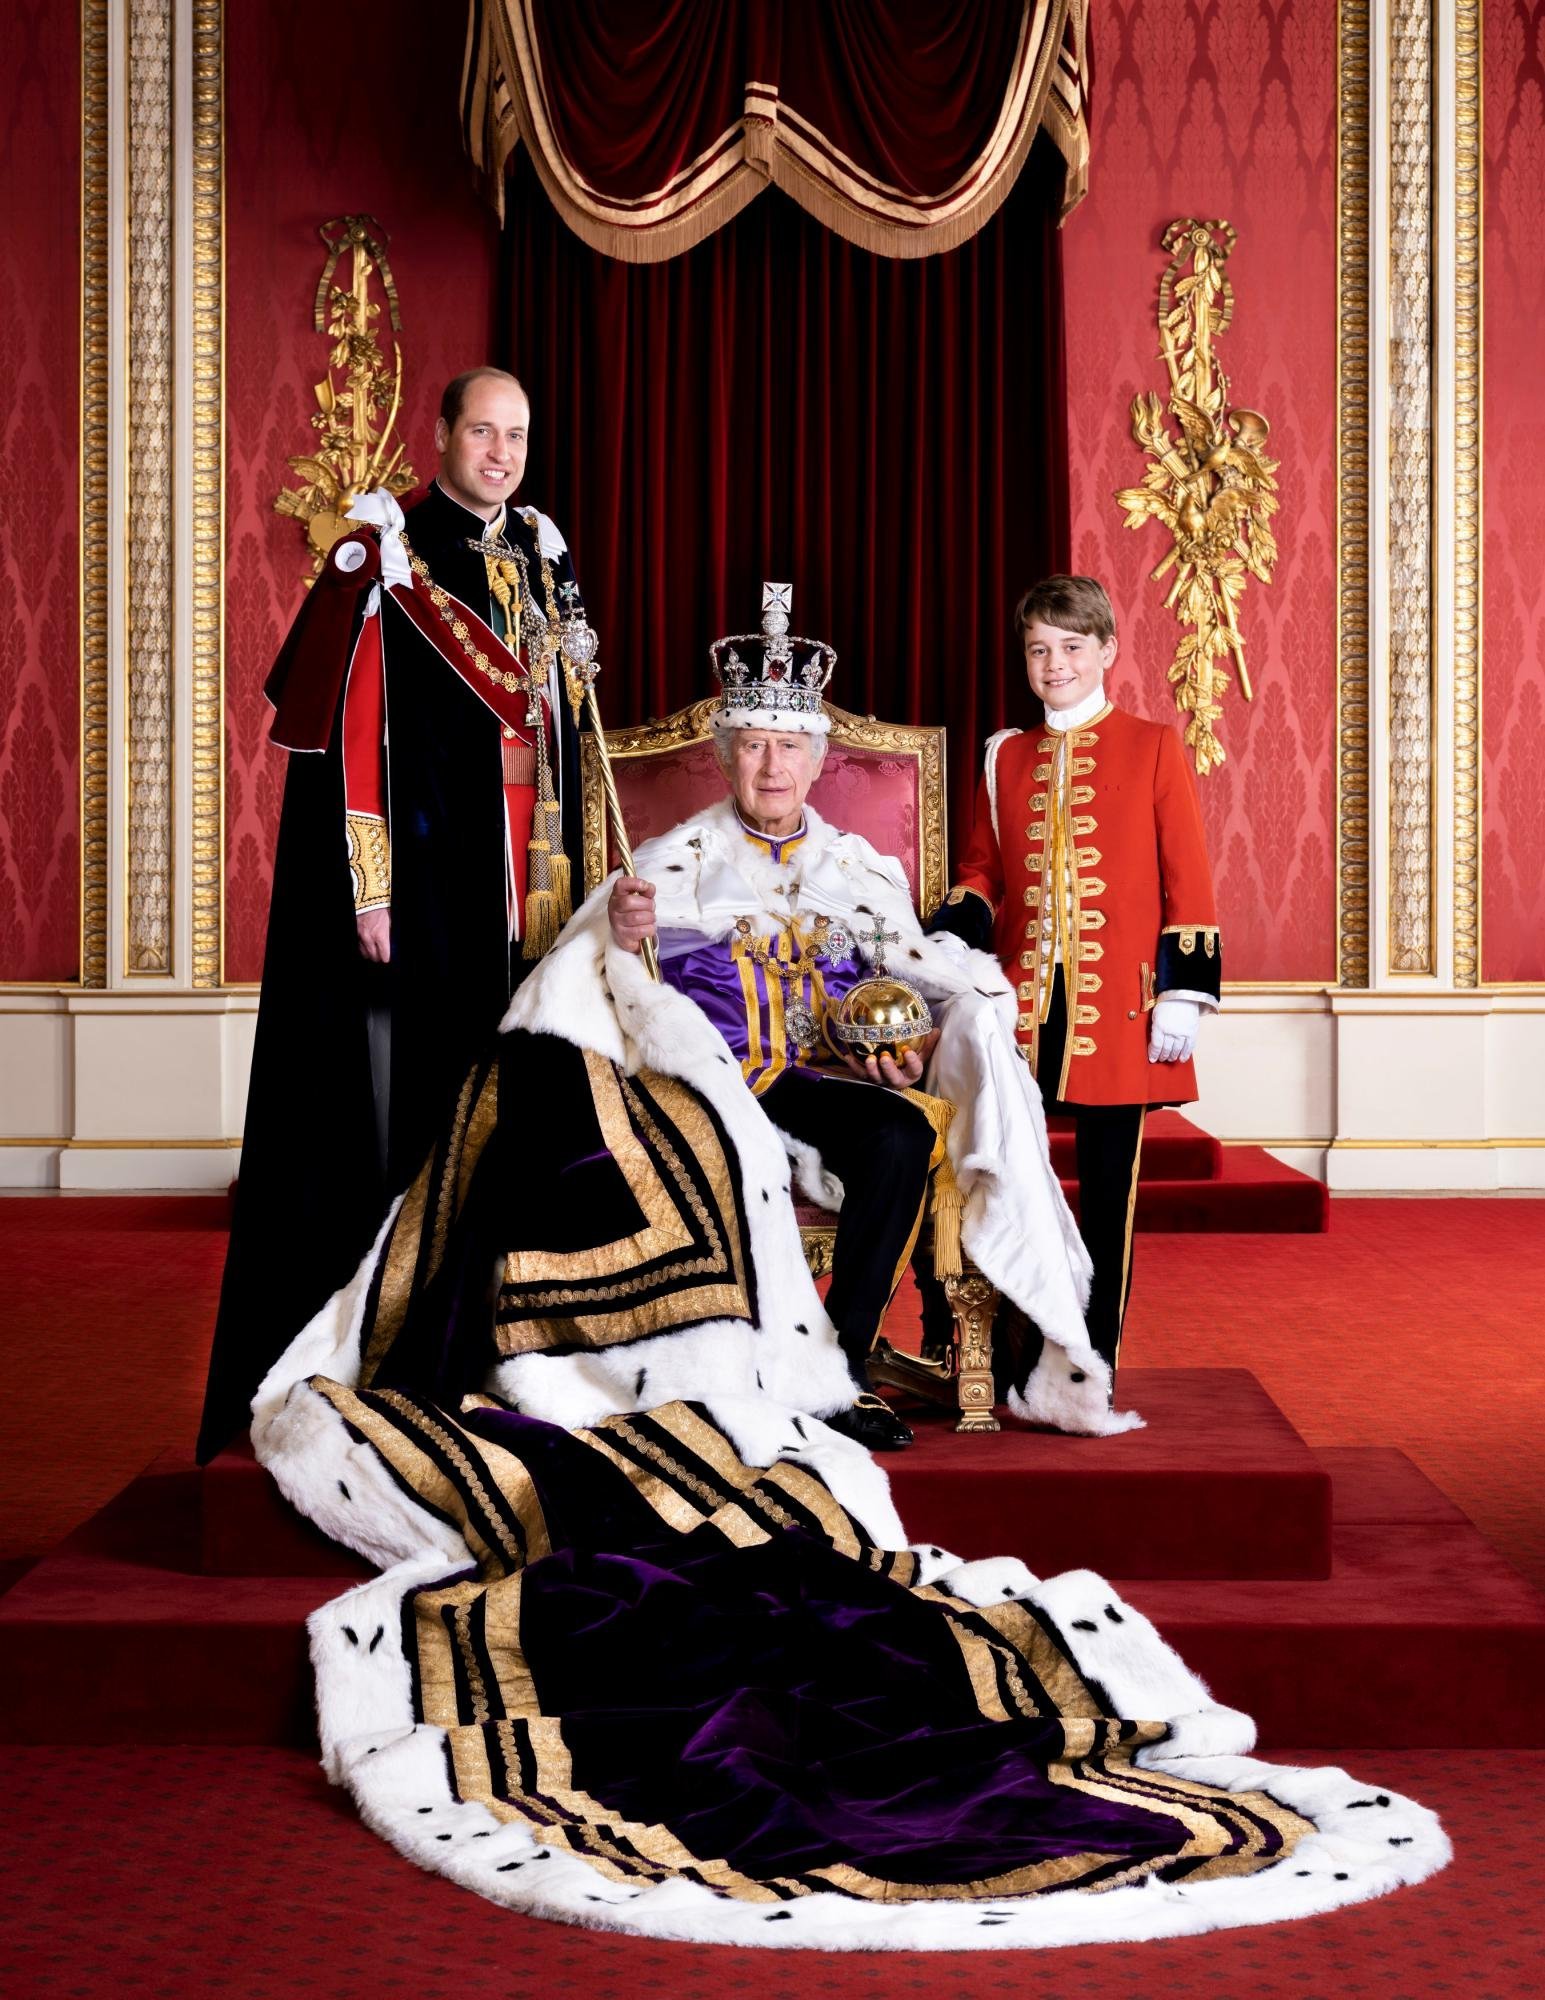 King Charles III is pictured at Buckingham Palace seated on the throne with his son Prince William by his side and Prince George on the other side.